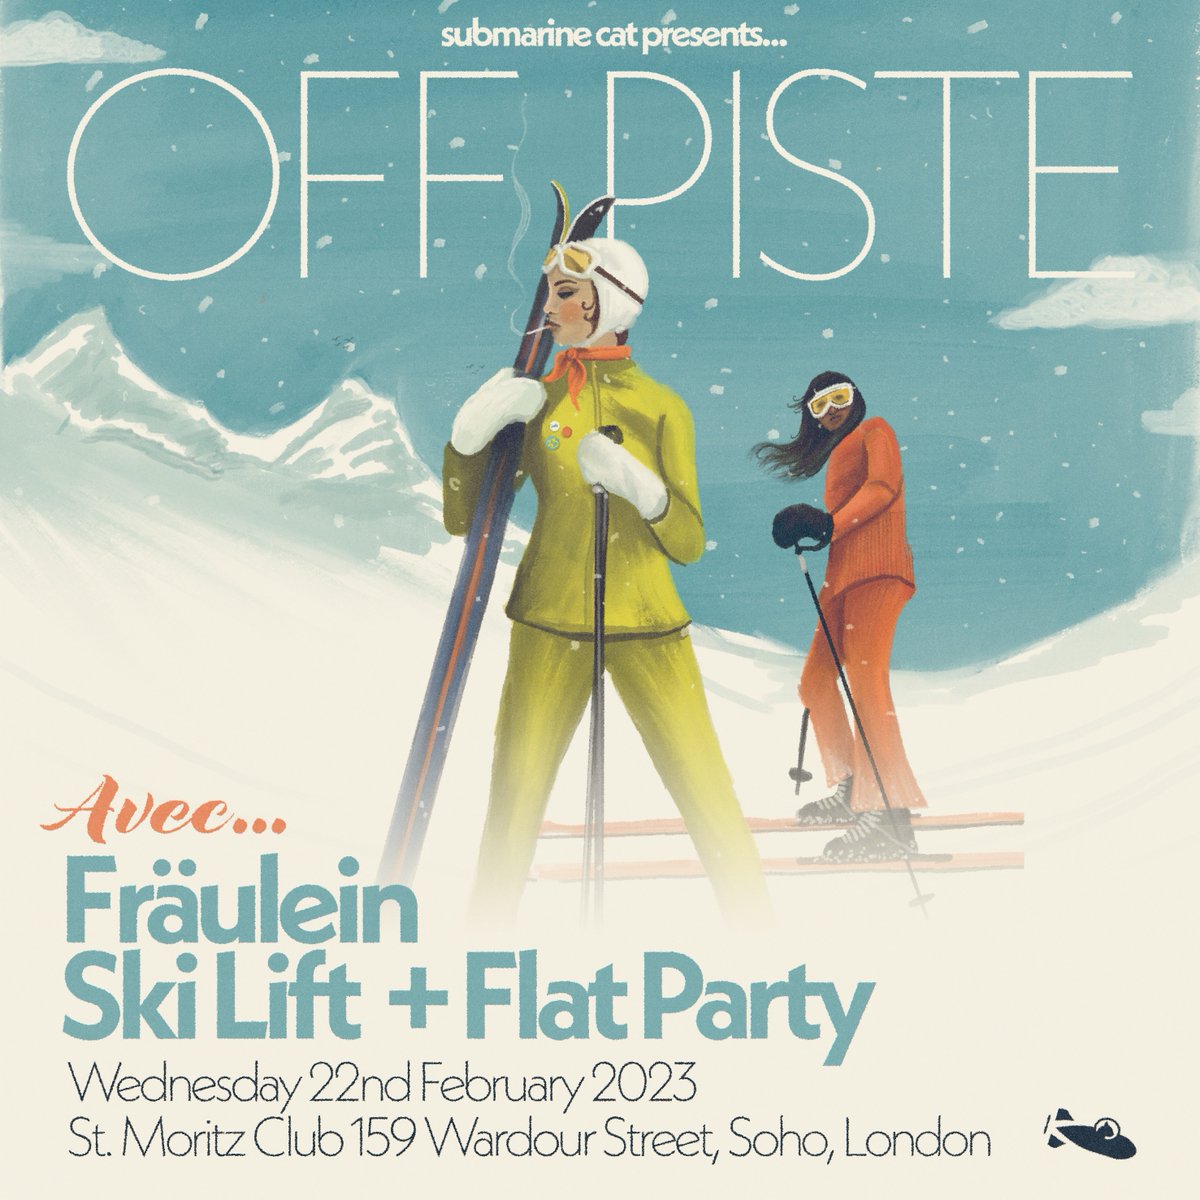 📢🎿 Dig out your ski gear, we’re throwing a party at St Moritz Club in Soho. We’re so excited to launch OFF PISTE, a night to showcase and celebrate some of our favourite bands in town. 📆 Wednesday 22nd Feb, doors 7:30PM ⛷ @frau13in @party_flat @helloskilift 🎟 FREE ENTRY